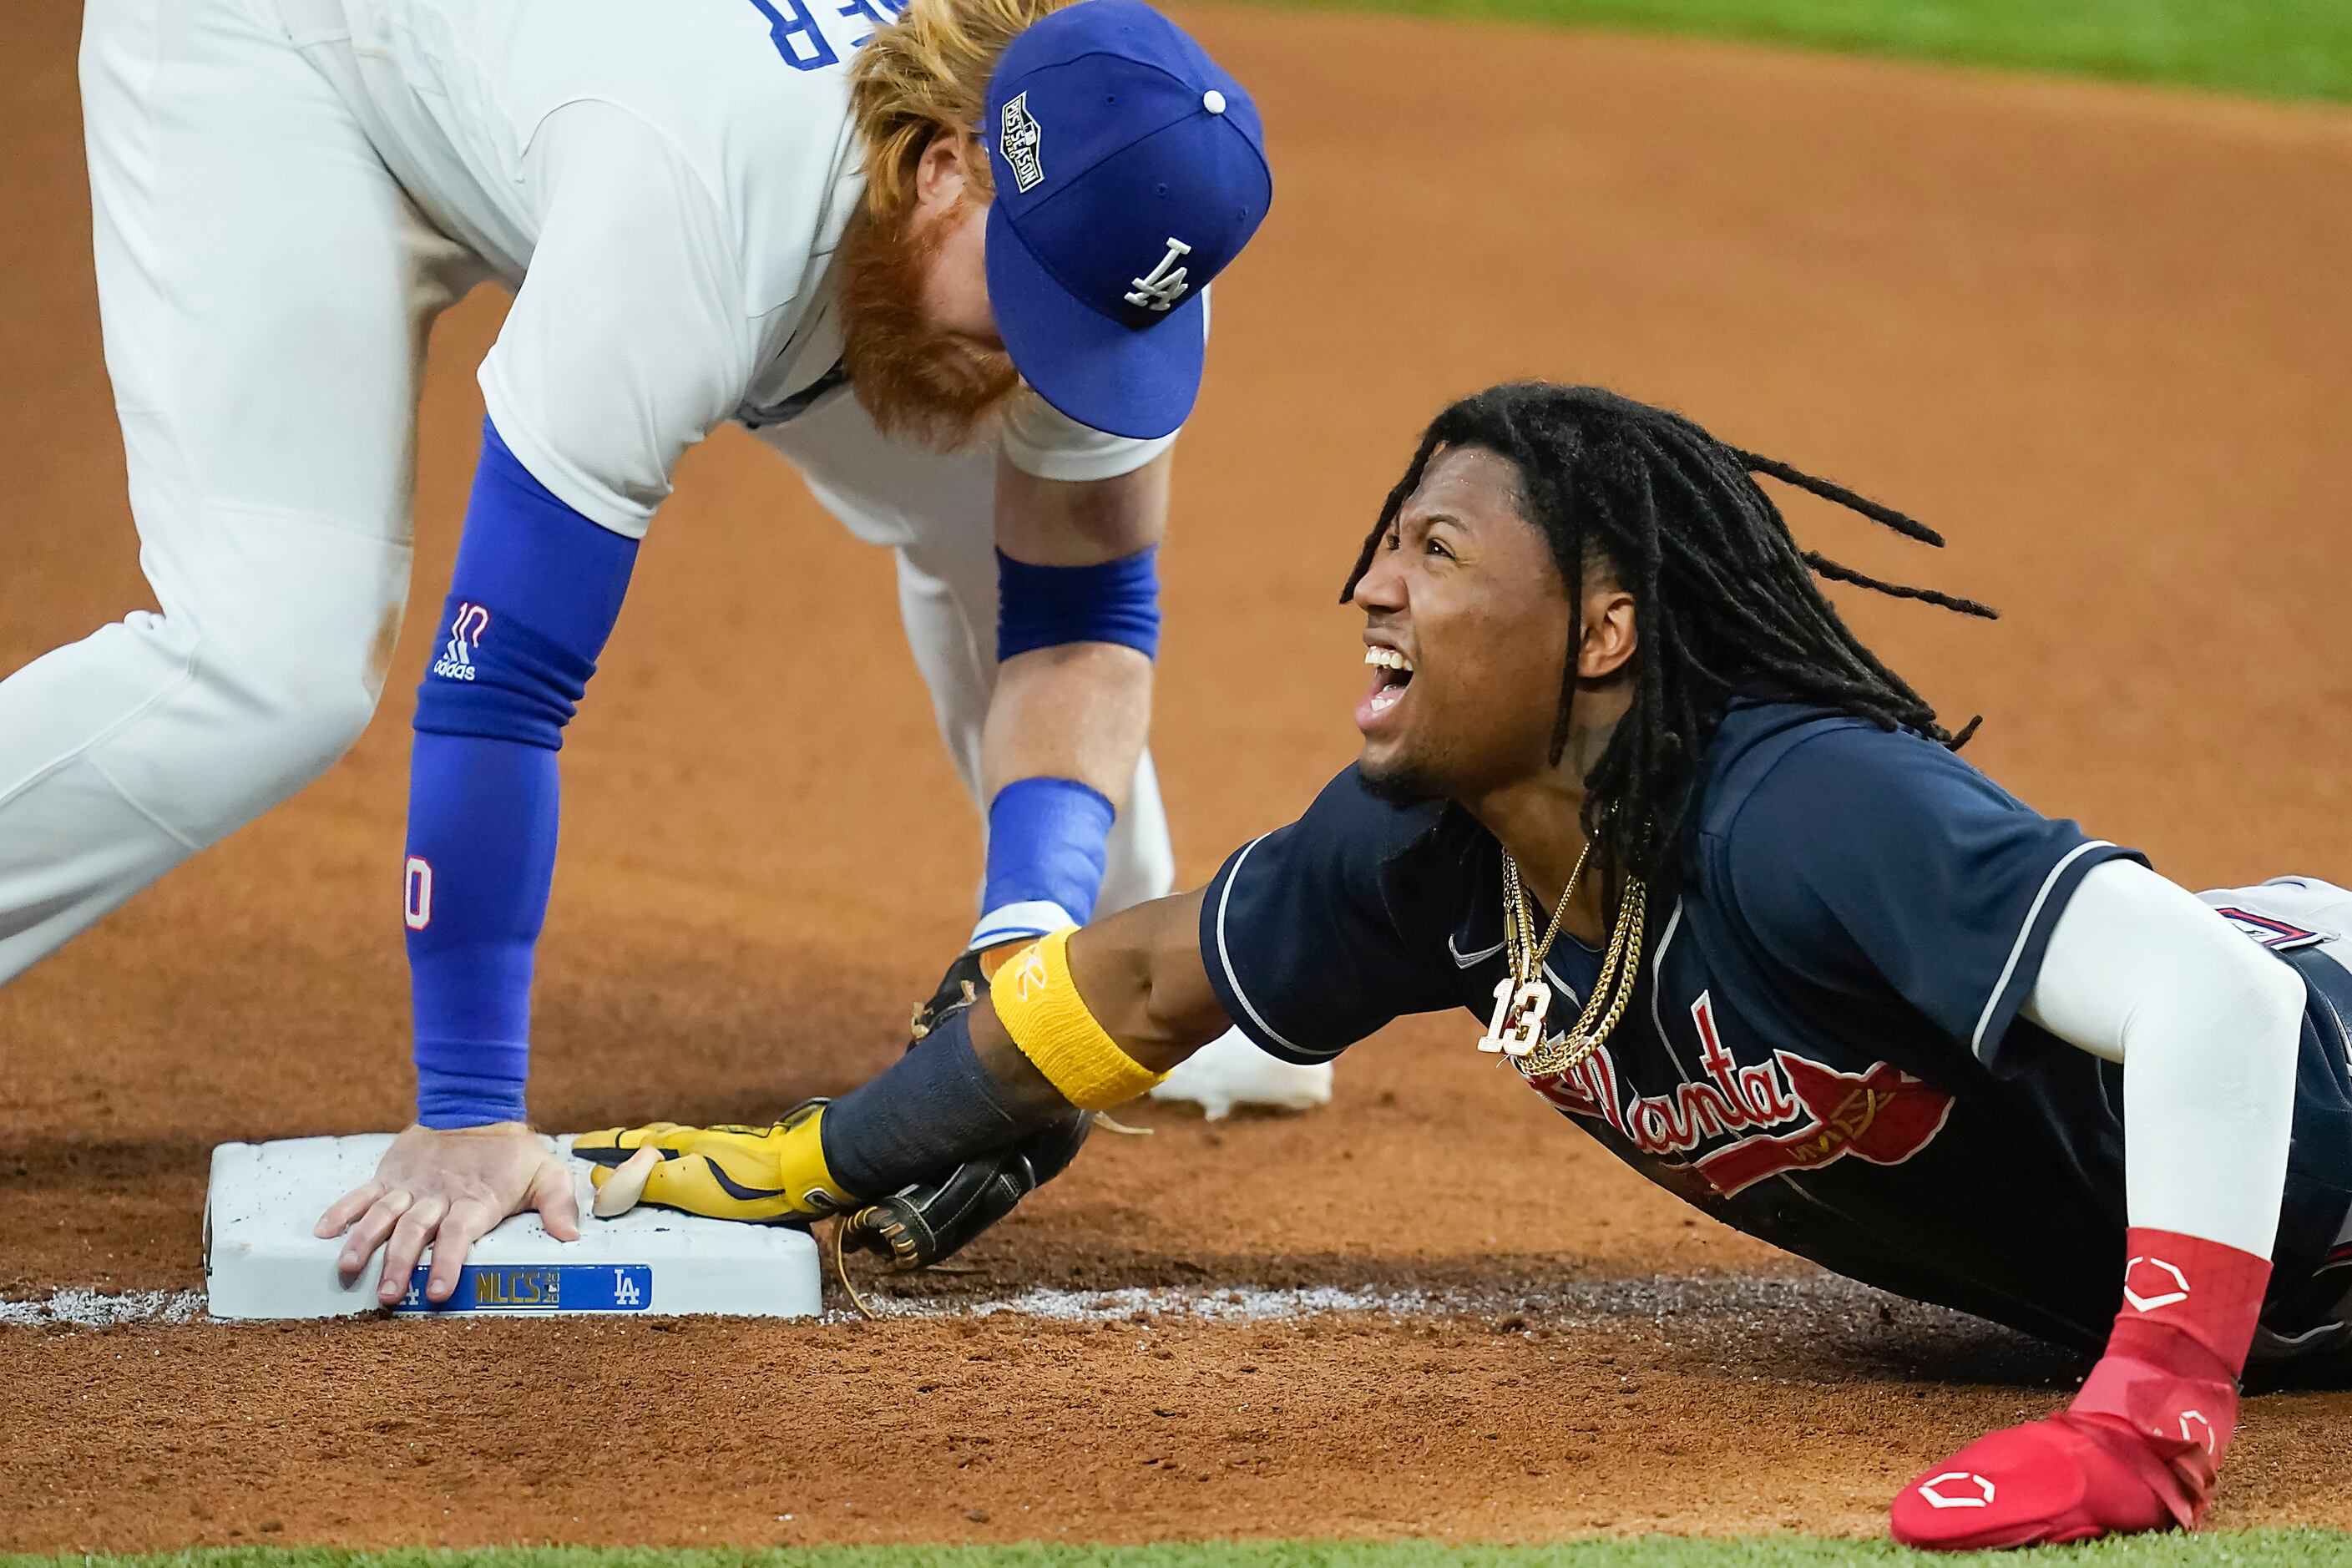 Photos: Smiling and sliding! Braves' Ronald Acuna Jr. slides in